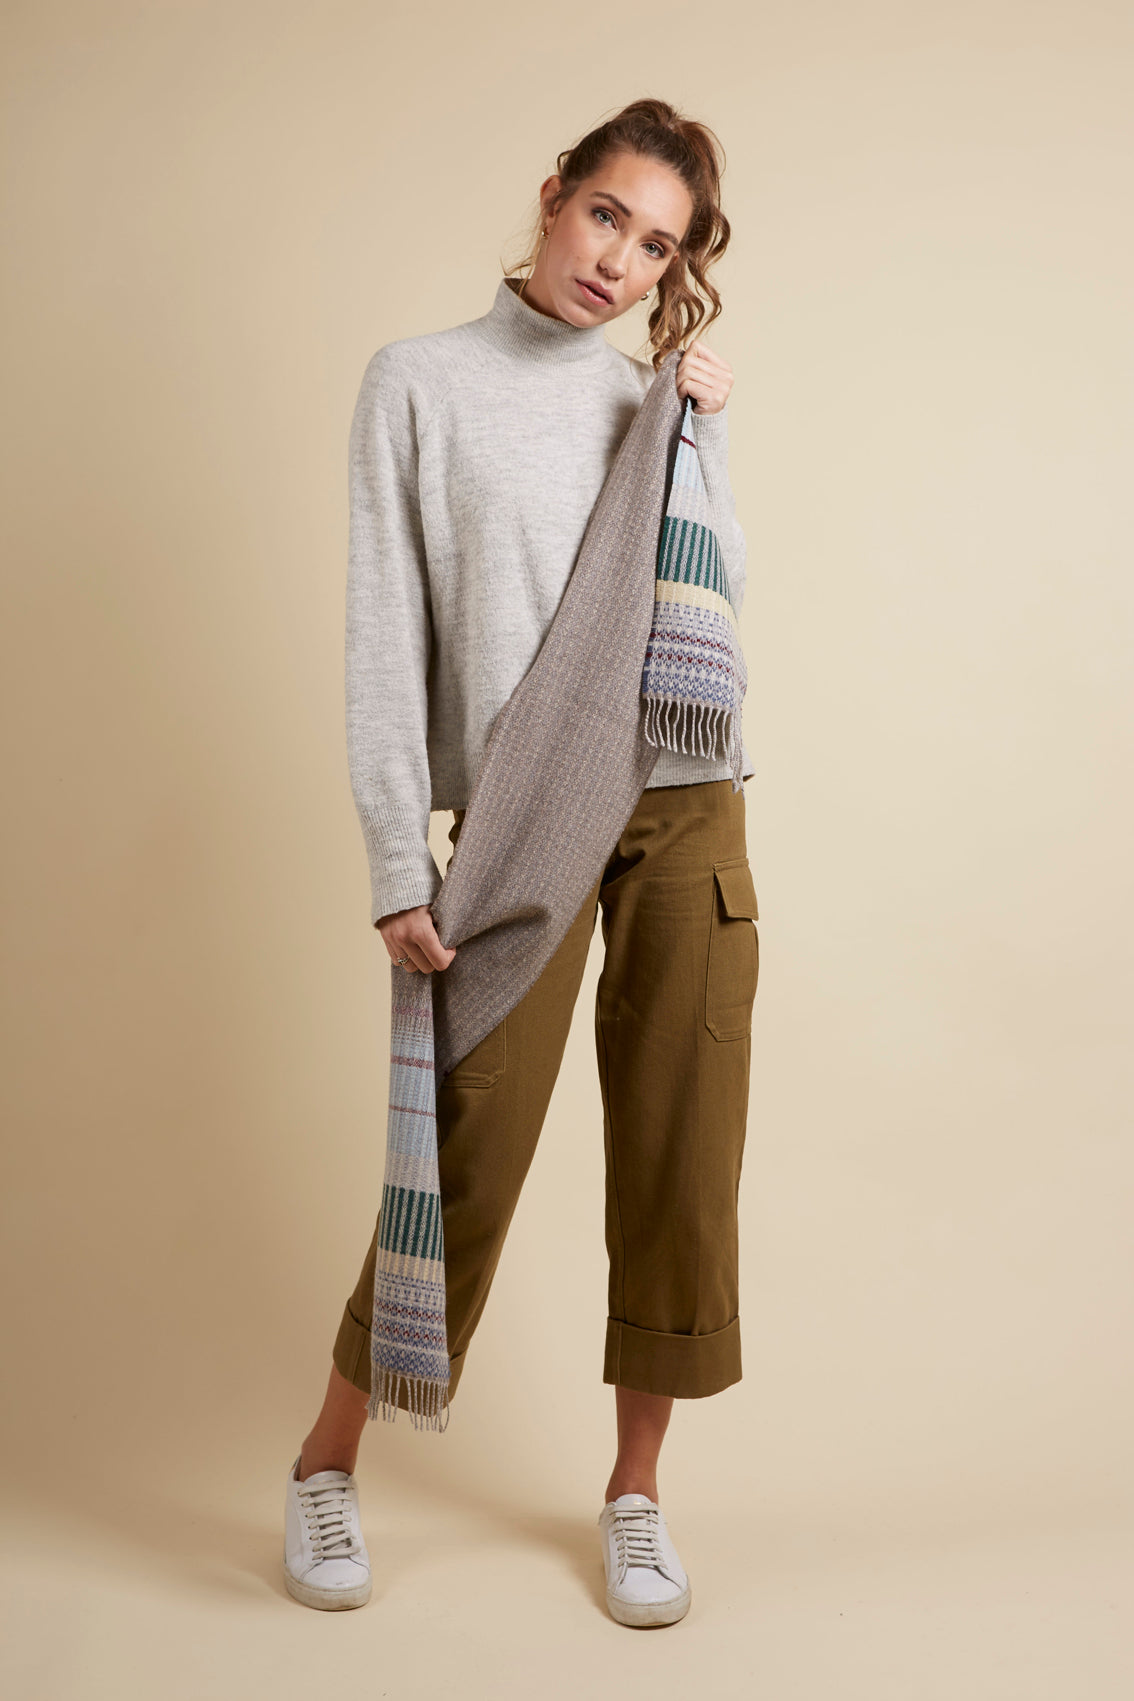 WALLACE+SEWELL - SCARF - ANOUILH - TAUPE